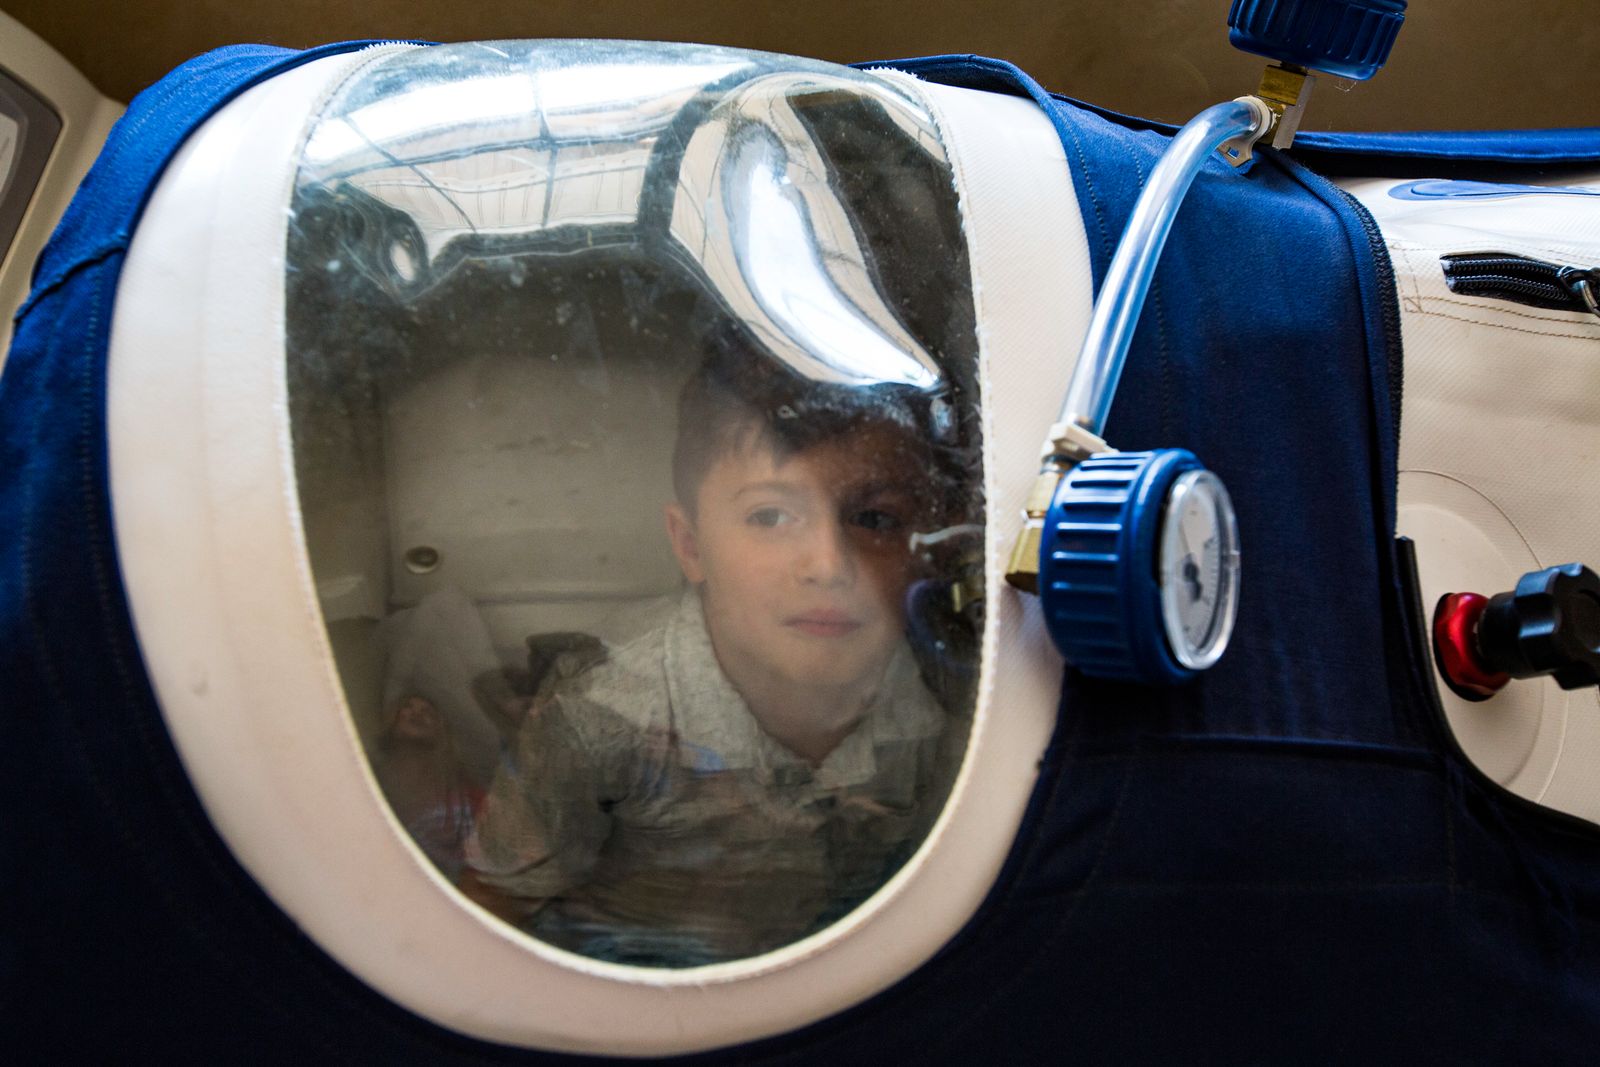 © Karen Haberberg - JAMESY OFTEN SLEEPS IN A HYPERBARIC CHAMBER TO HELP IMPROVE HIS BREATHING, AND HIS DAD ALWAYS JOINS HIM.